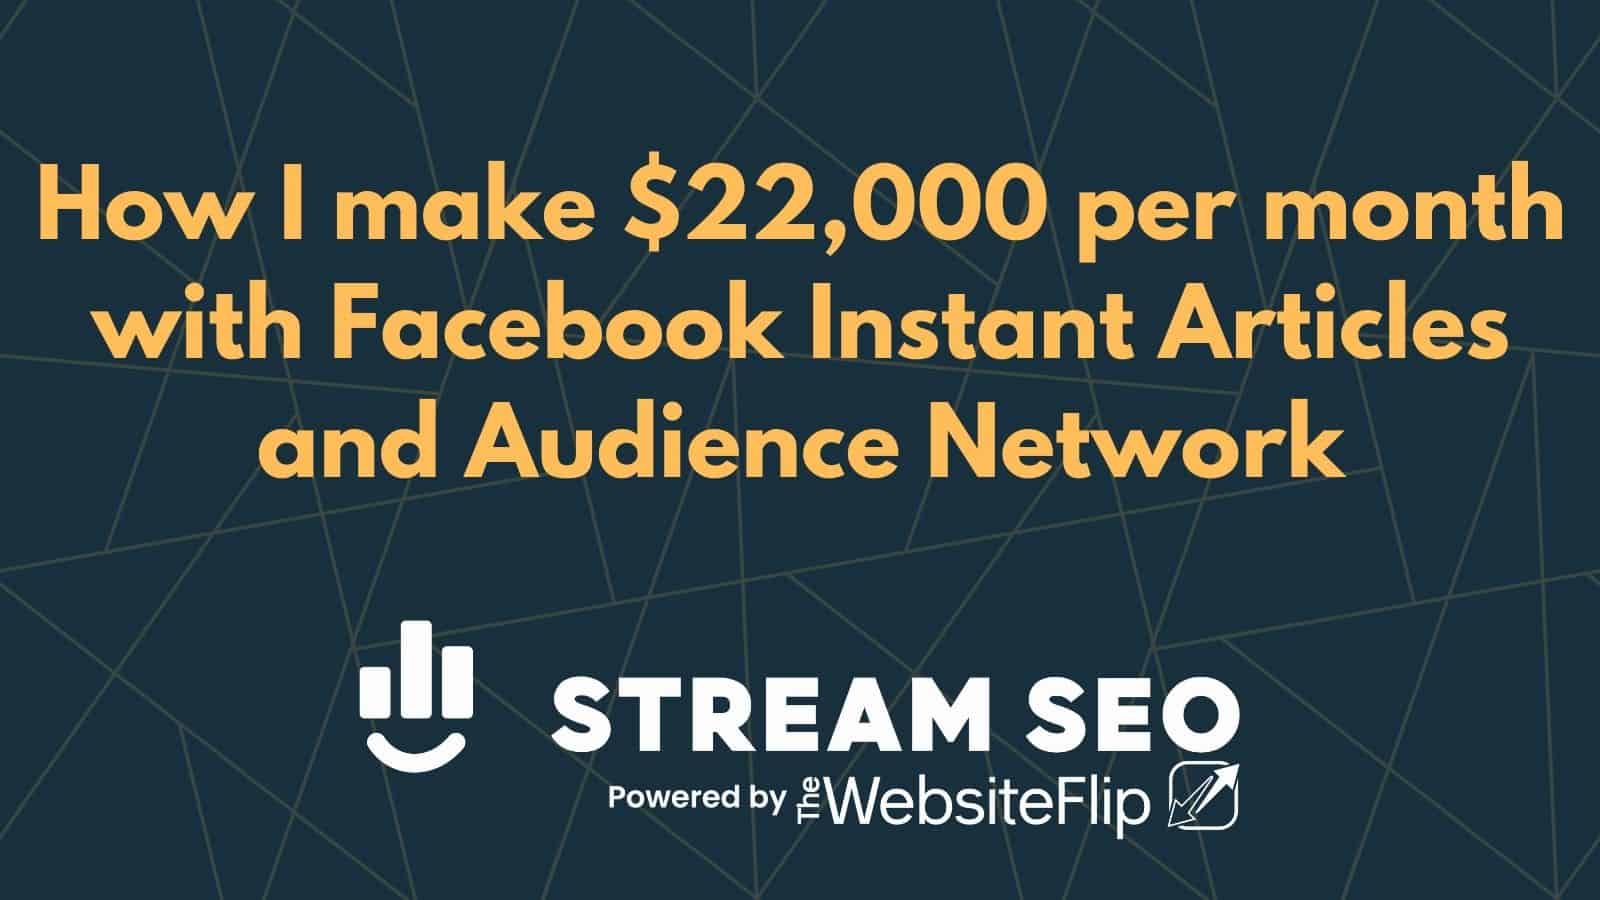 How I make $22,000 per month with Facebook Instant Articles and Audience Network